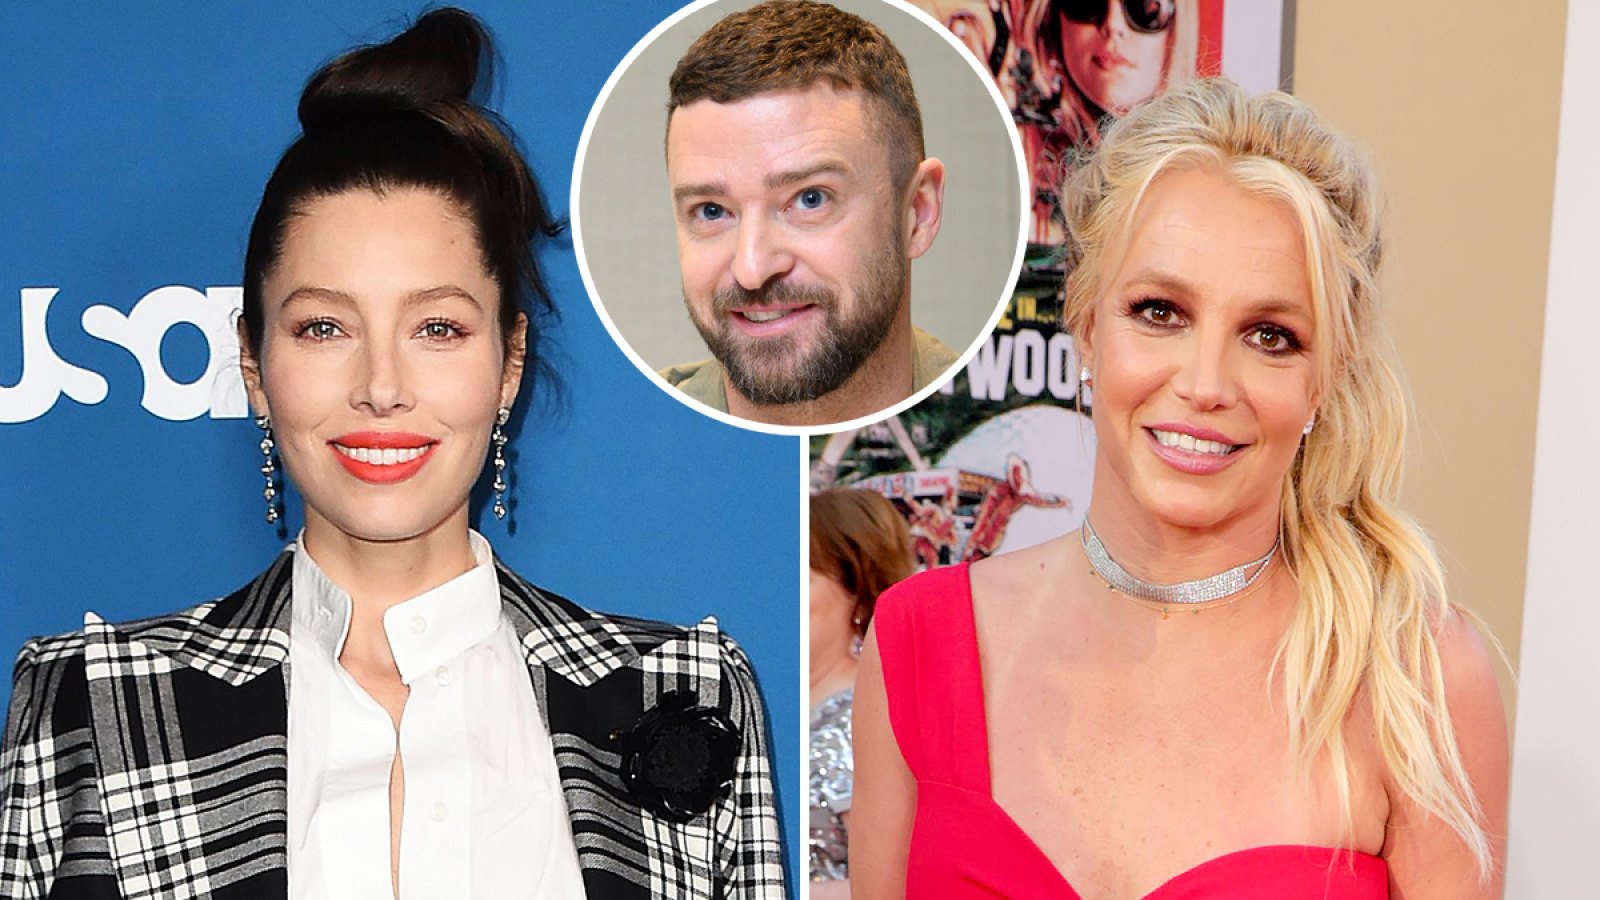 Jessica Biel Is Not Threatened by Britney Spears and Justin Timberlake Instagram Exchange